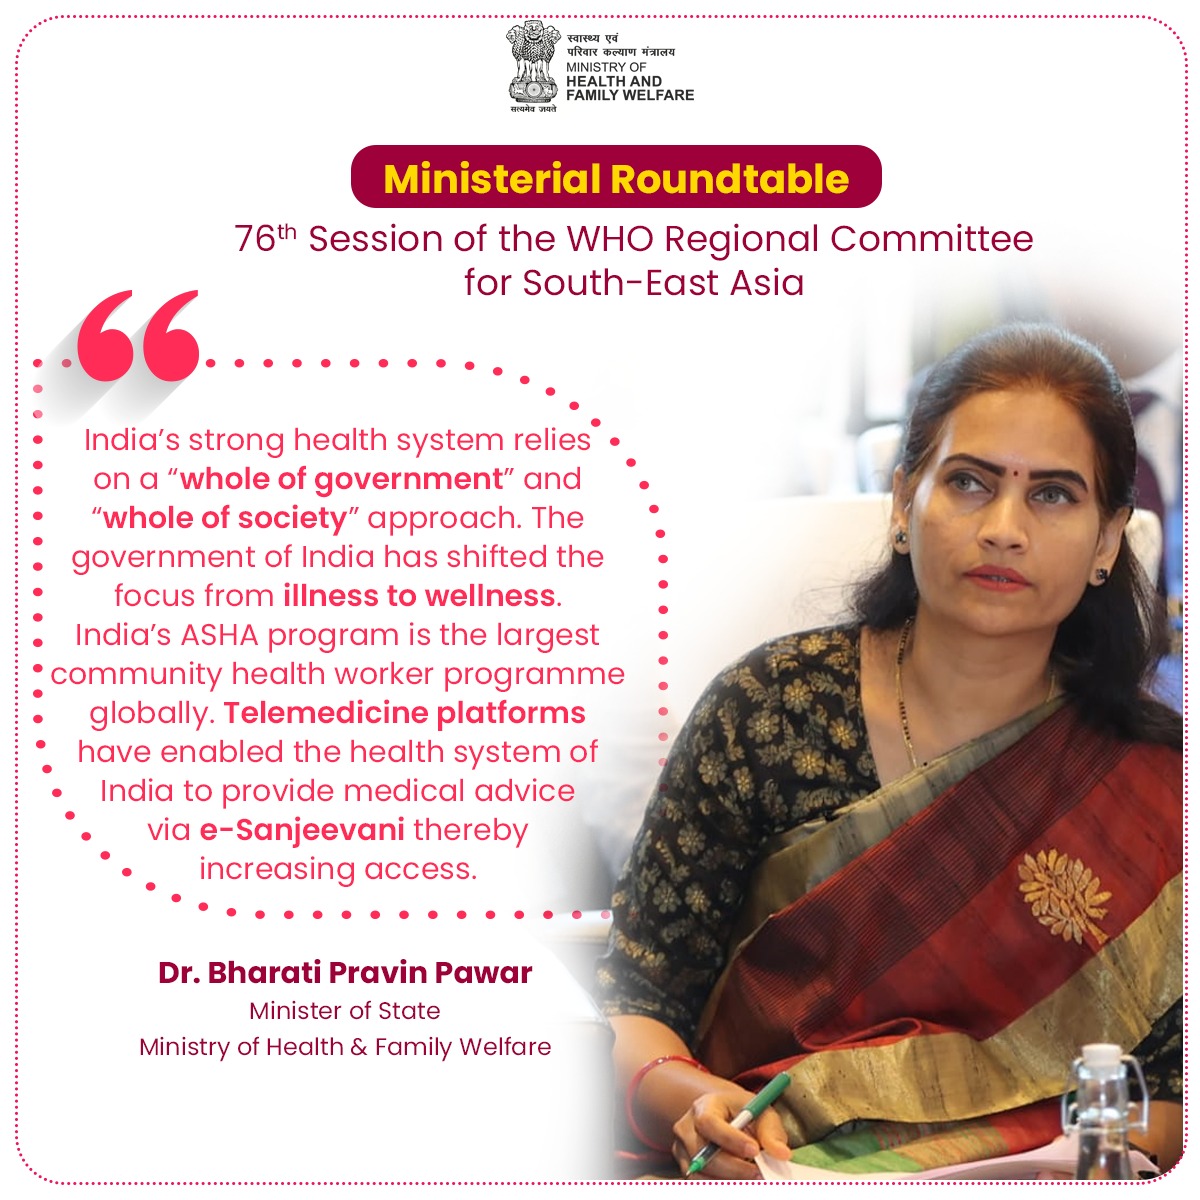 During the ministerial round table of the 76th @WHOSEARO Regional Committee Meeting, MoS (Health) @DrBharatippawar provided detailed insights into India's key interventions towards attaining #UniversalHealthCoverage.

#RC76